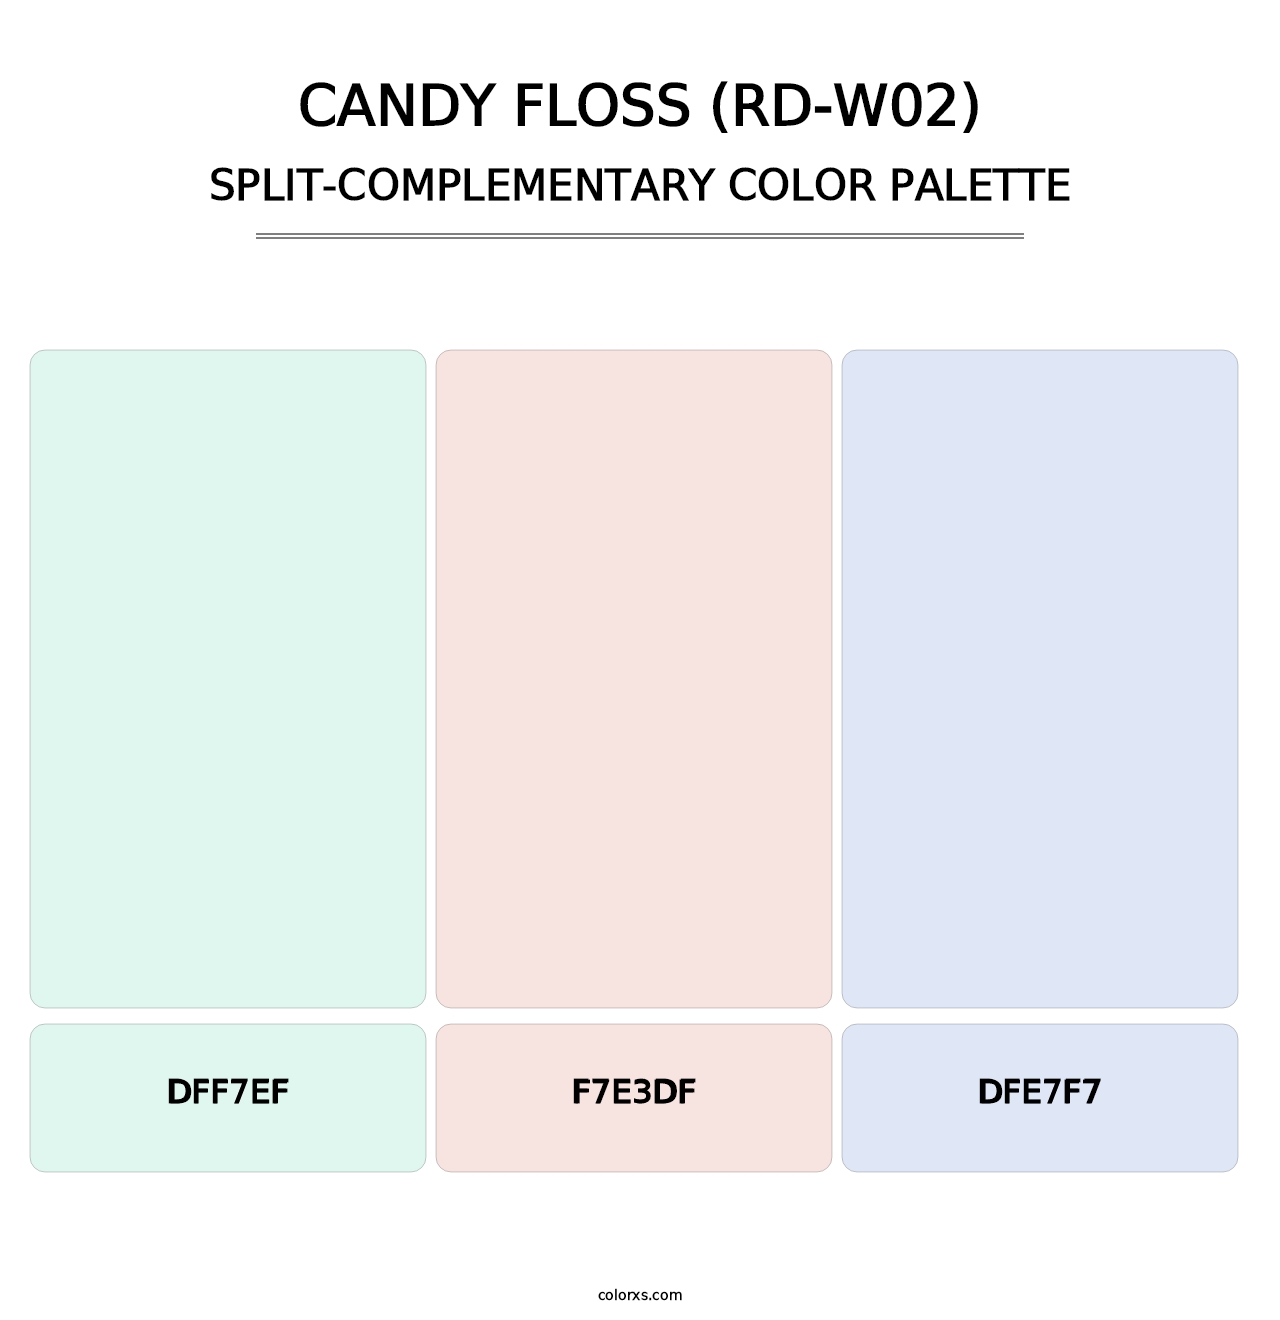 Candy Floss (RD-W02) - Split-Complementary Color Palette